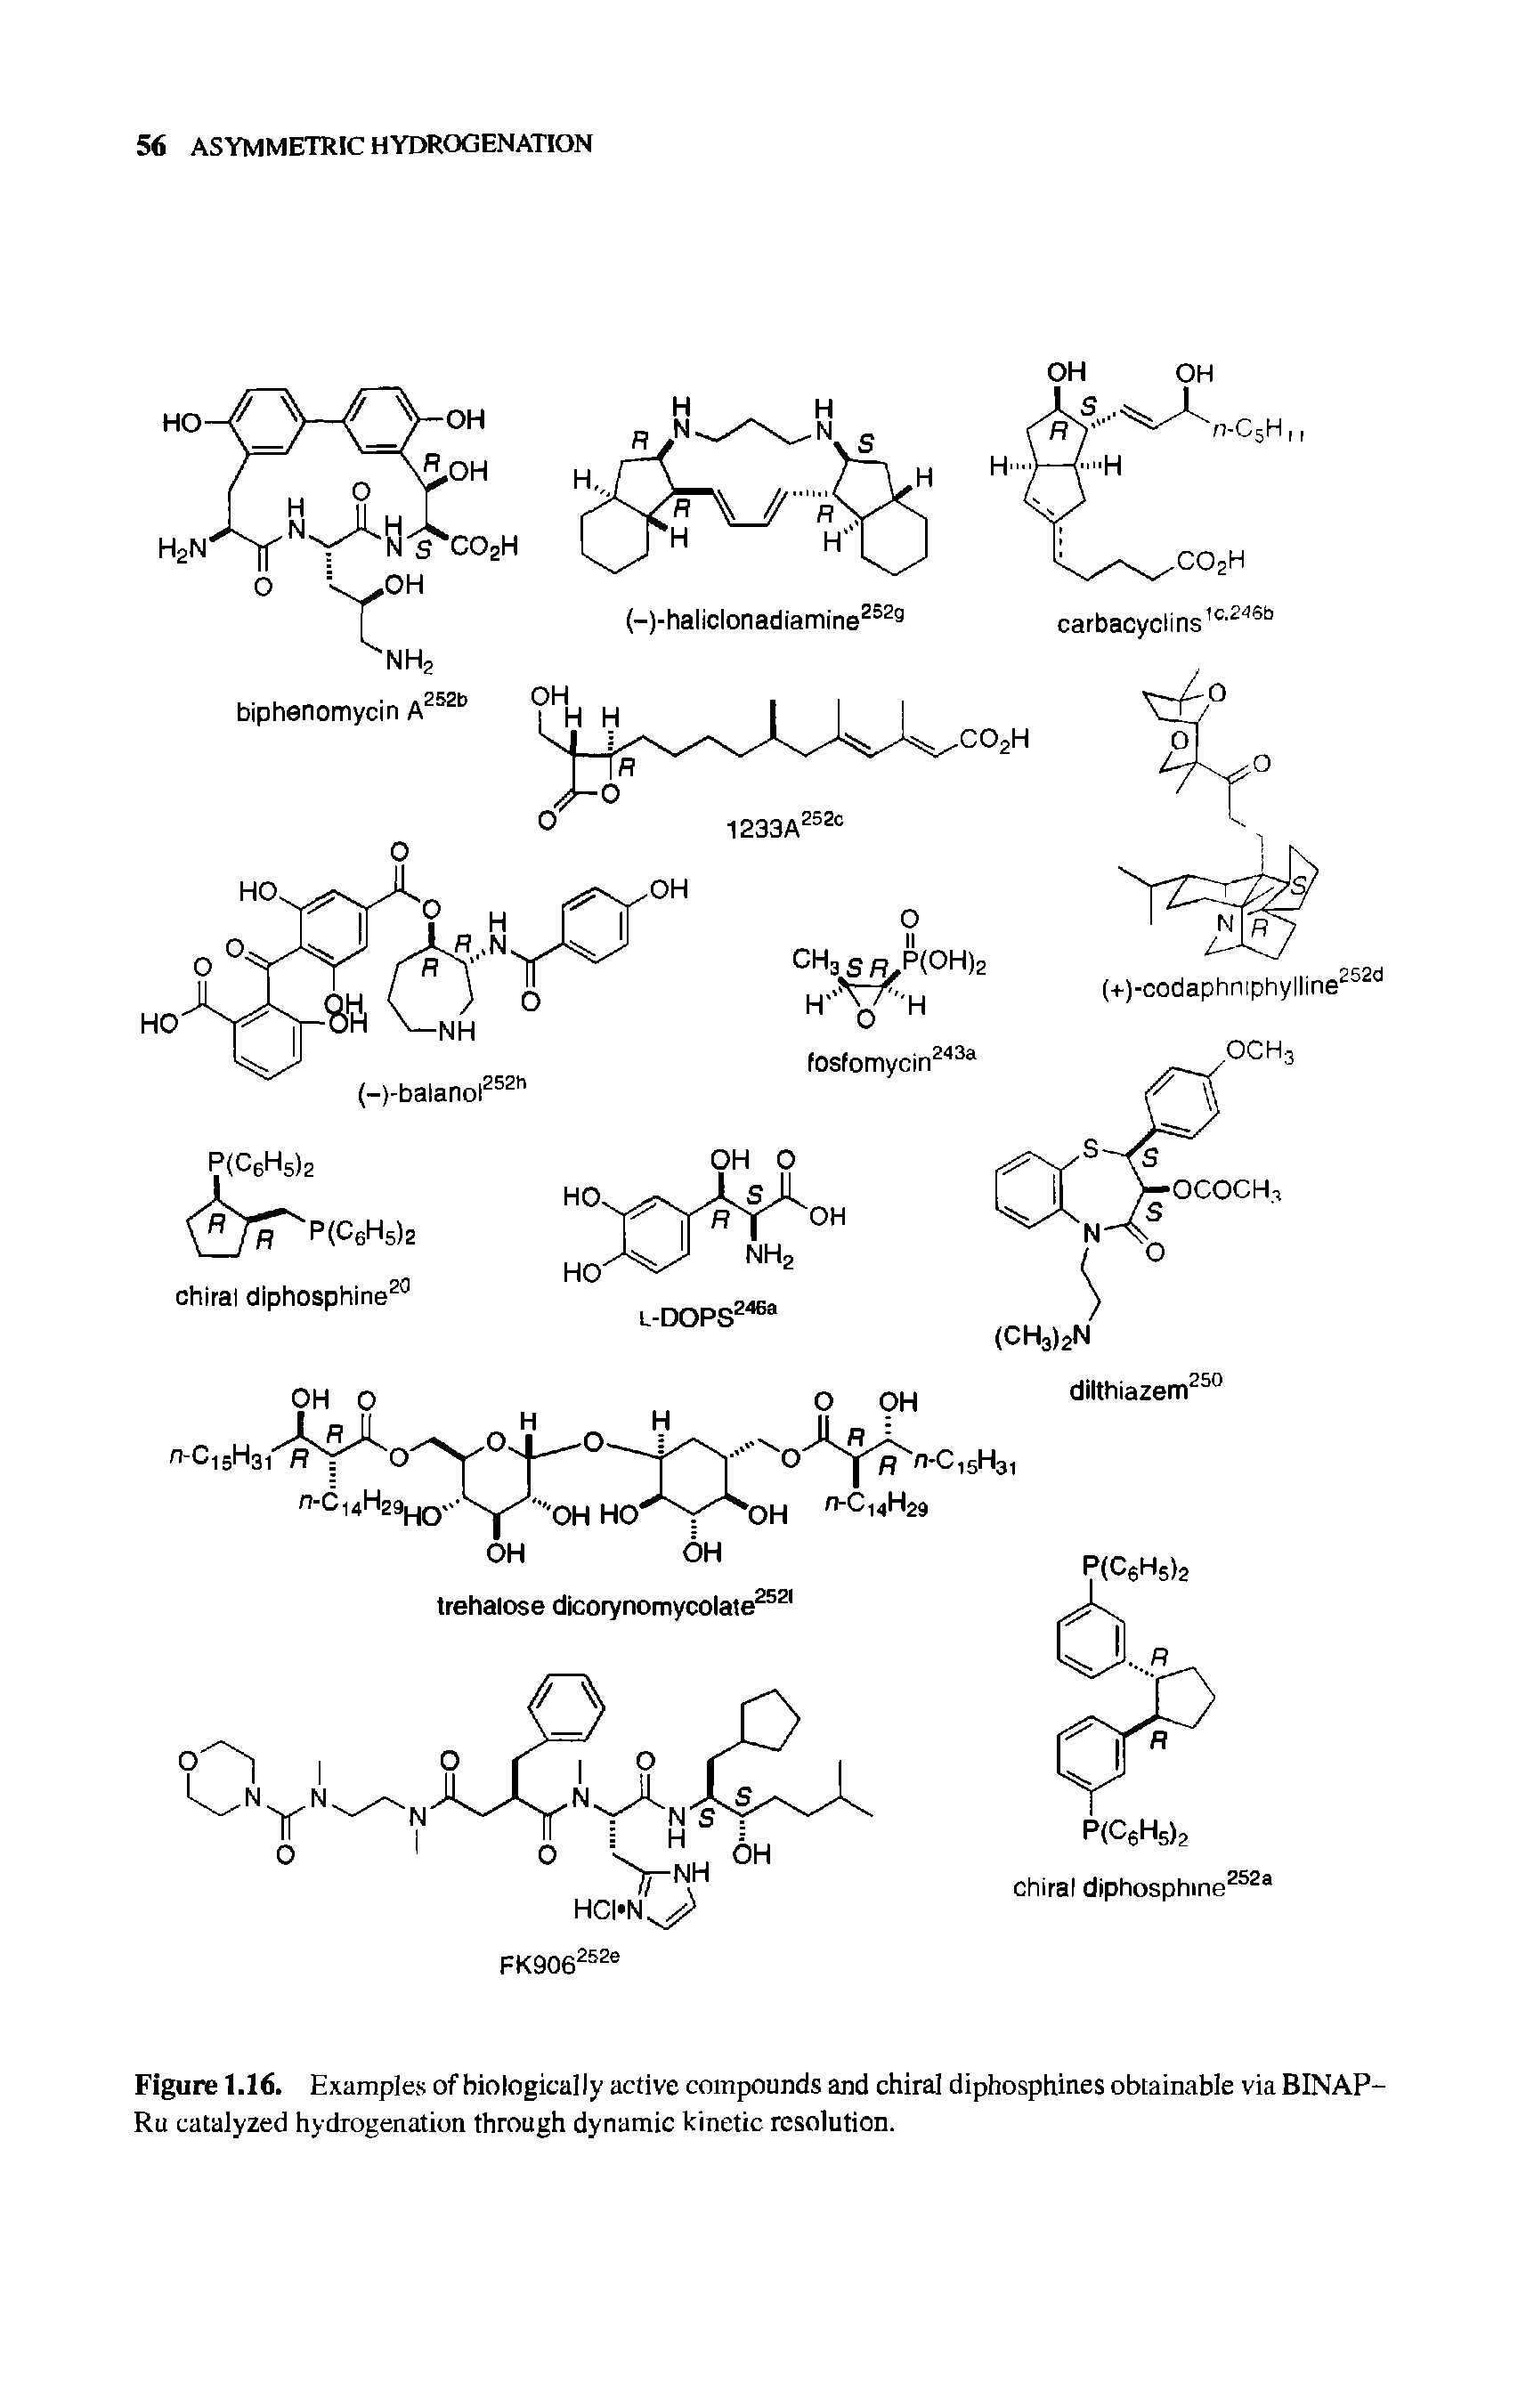 Figure 1.16. Examples of biologically active compounds and chiral diphosphines obtainable viaBINAP-Ru catalyzed hydrogenation through dynamic kinetic resolution.